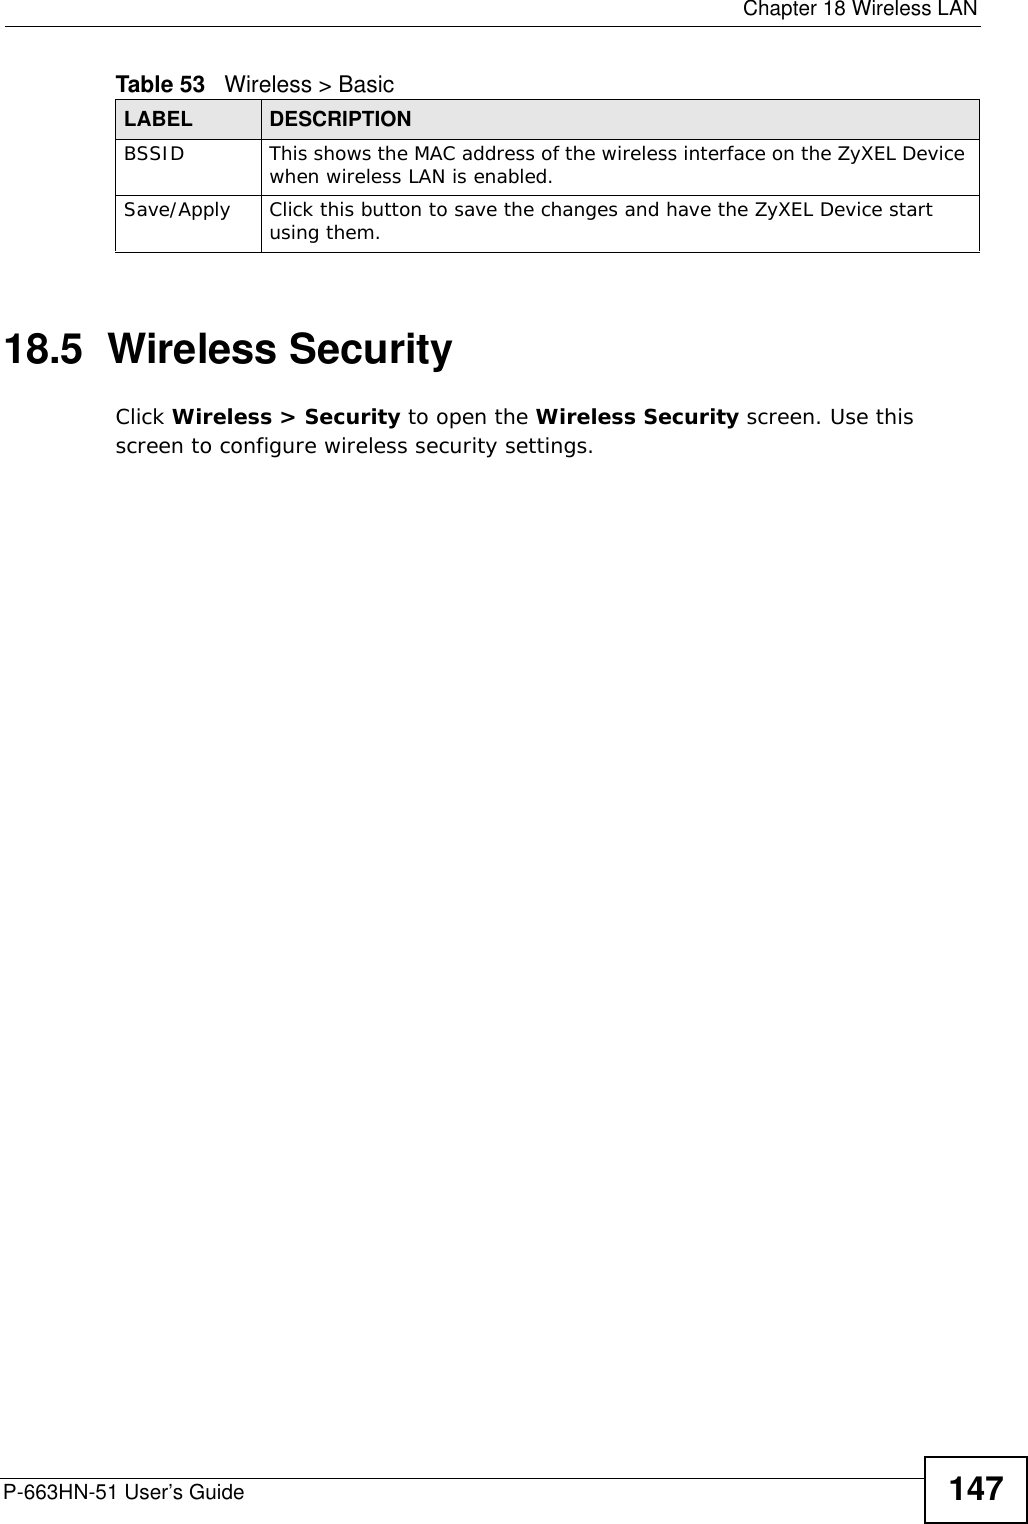  Chapter 18 Wireless LANP-663HN-51 User’s Guide 14718.5  Wireless Security Click Wireless &gt; Security to open the Wireless Security screen. Use this screen to configure wireless security settings.BSSID This shows the MAC address of the wireless interface on the ZyXEL Device when wireless LAN is enabled.Save/Apply Click this button to save the changes and have the ZyXEL Device start using them.Table 53   Wireless &gt; BasicLABEL DESCRIPTION